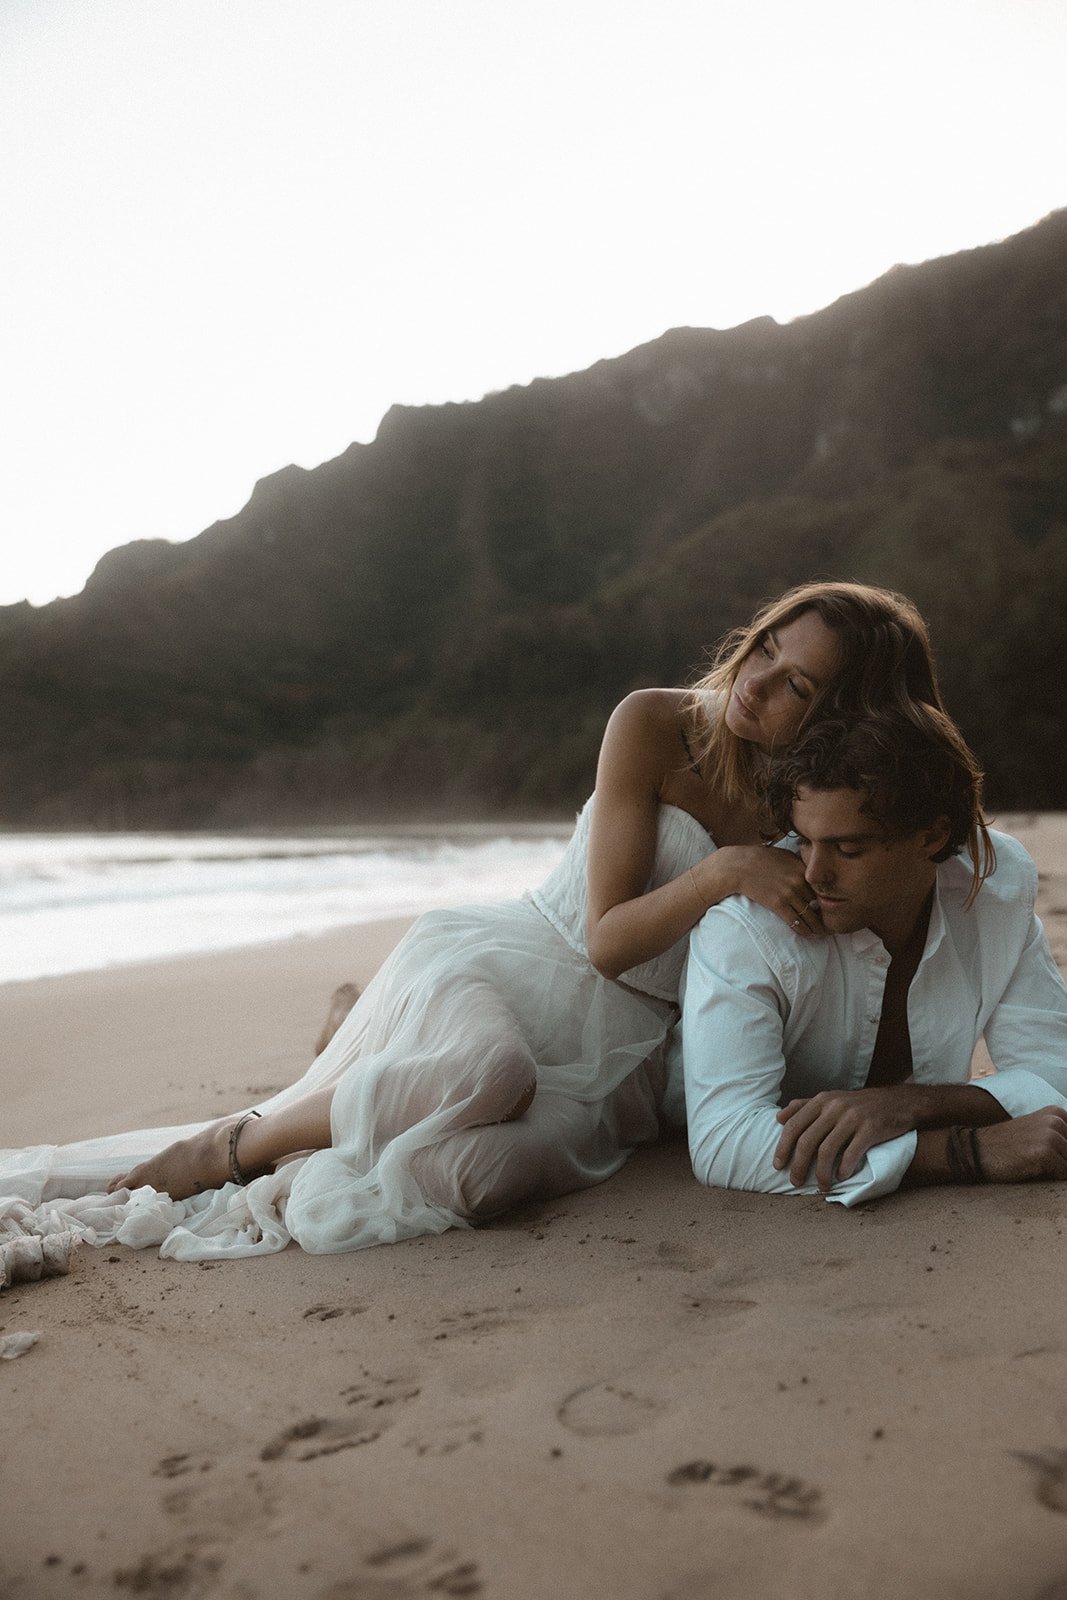   Olivia wedding dress.  Elopement in Hawaii. Photo by  Madison Maltby Photography.   